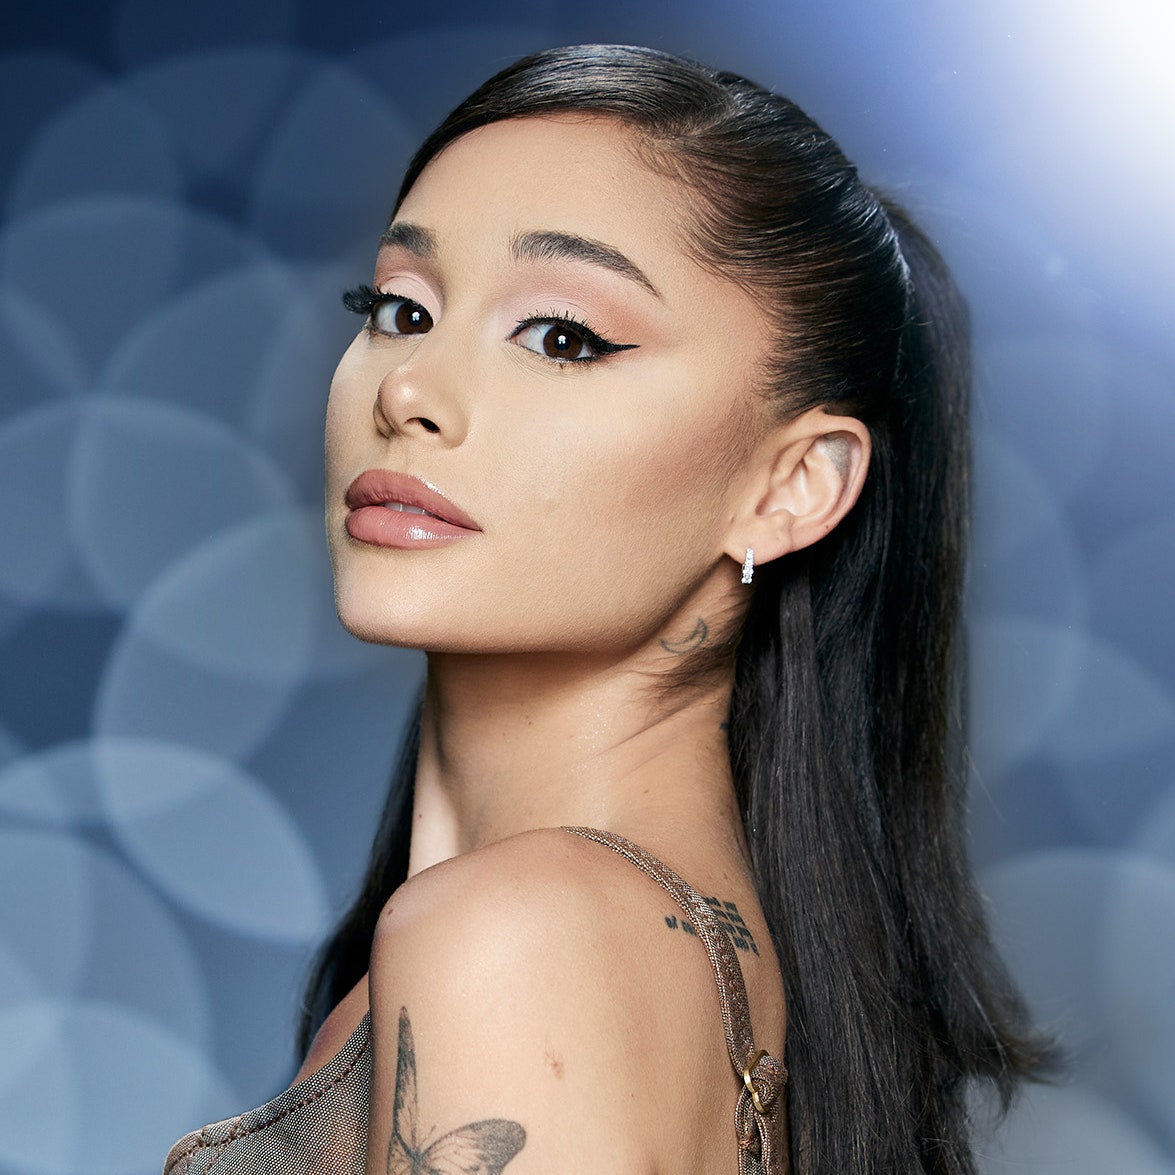 Ariana Grande Goes Vintage With Blonde Pigtails And Bangs For '60s Inspired Photohoot